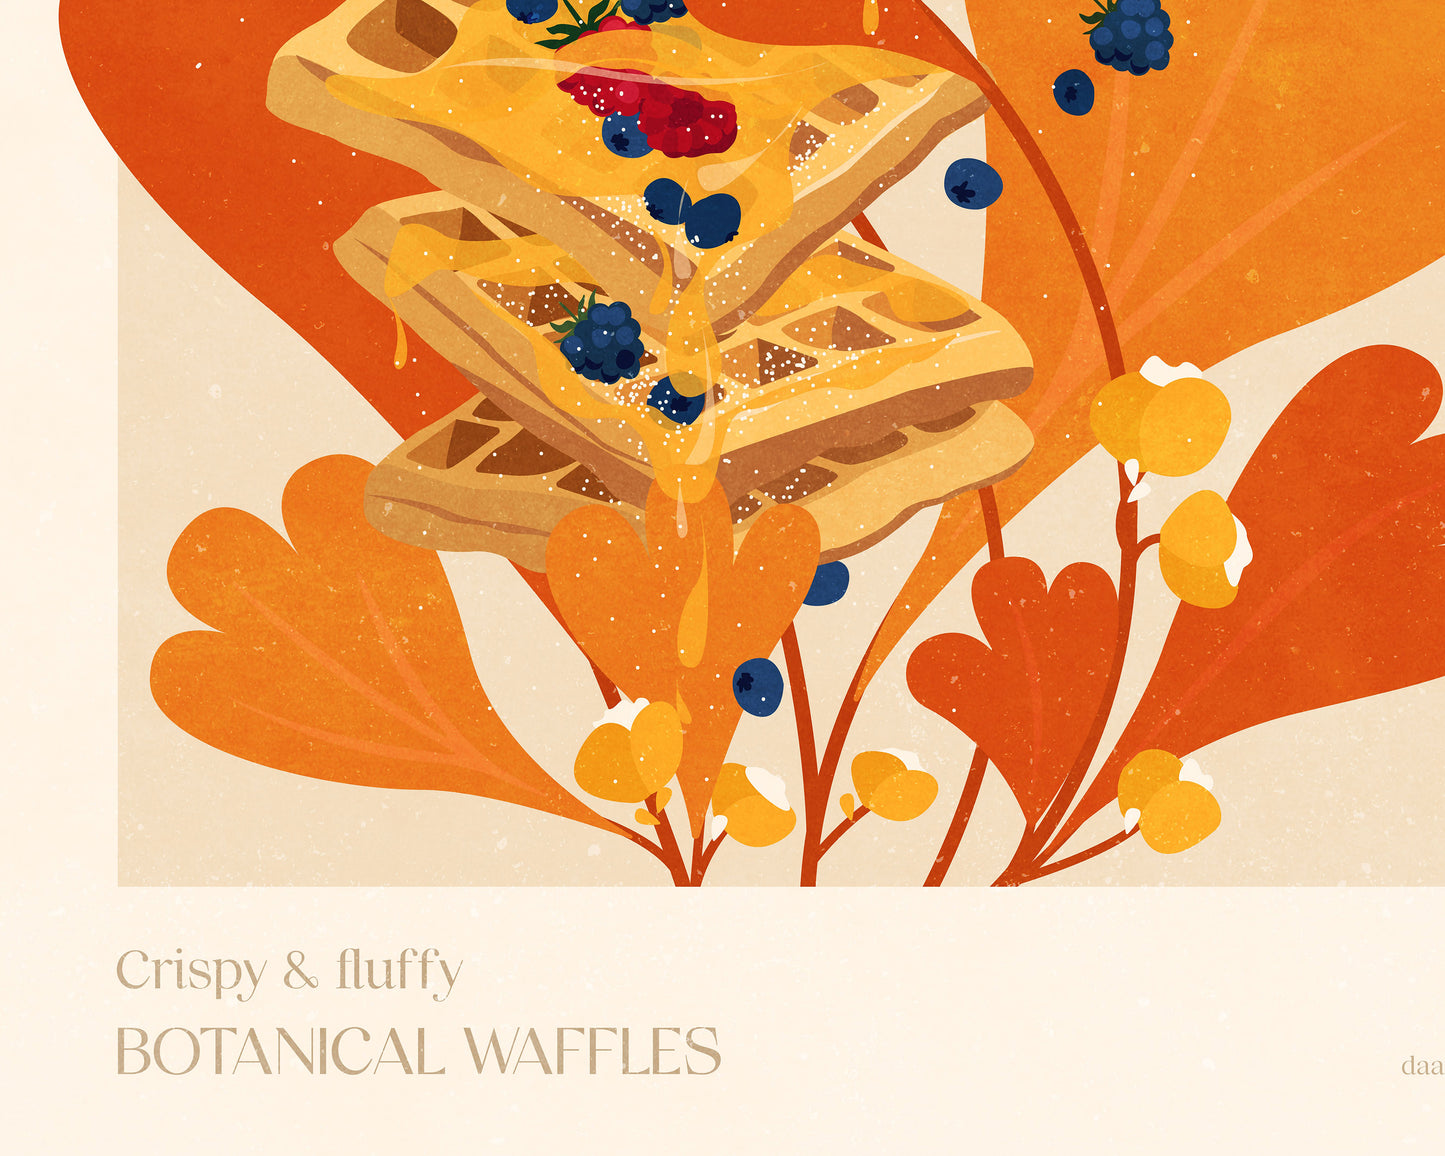 Details Orange and yellow Crispy and fluffy botanical waffles poster